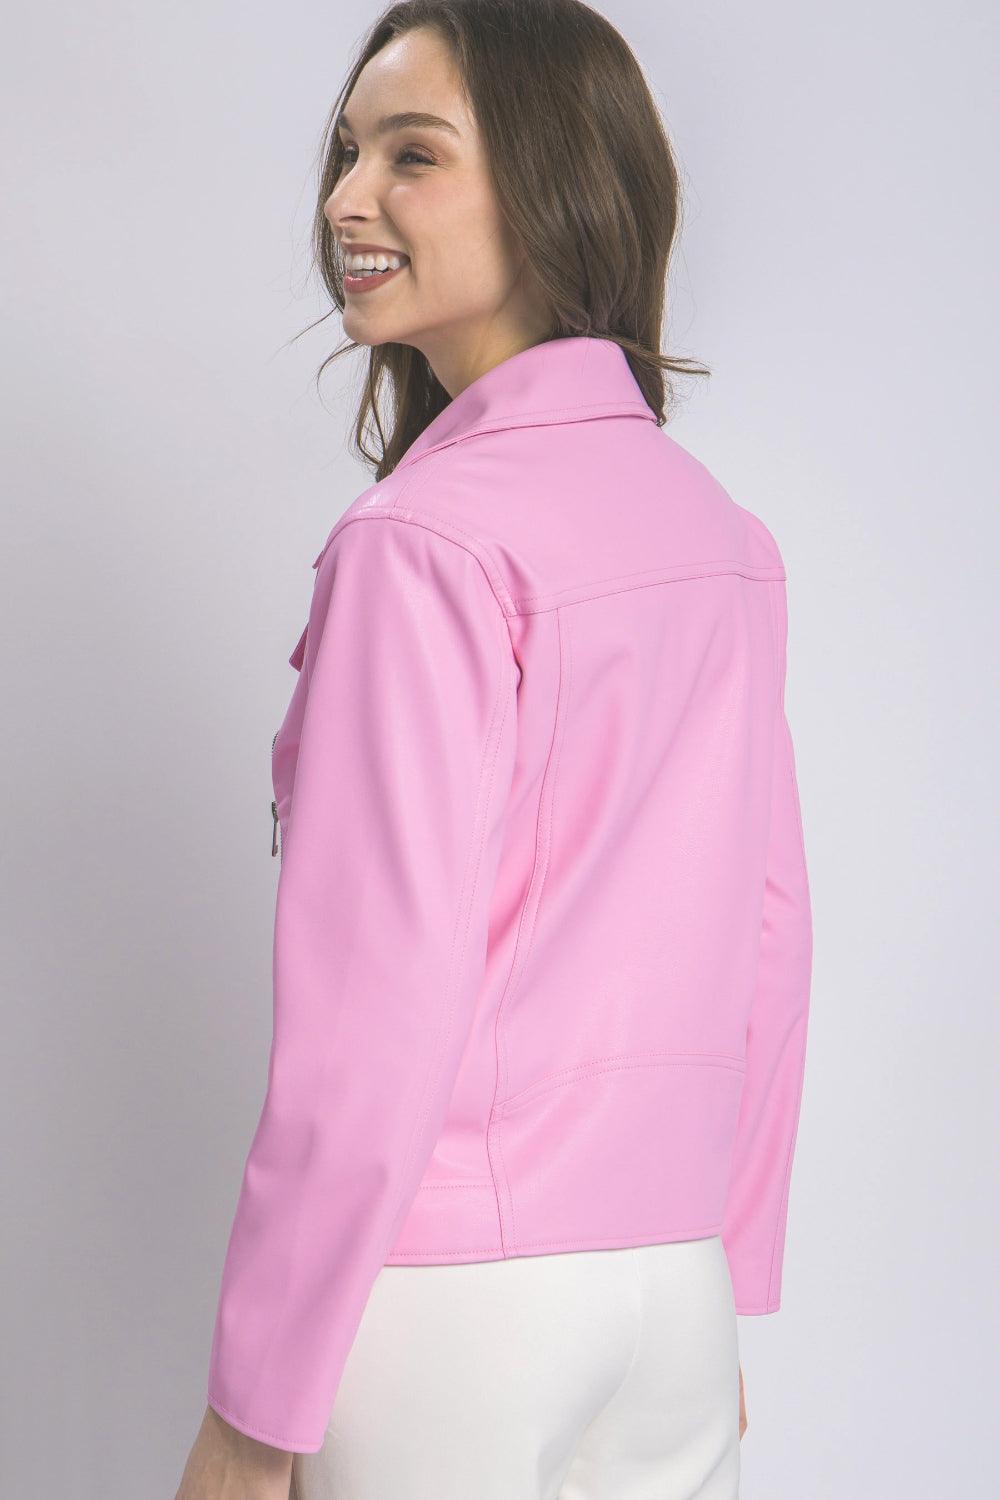 LOVE TREE Collared Neck Zip Up Jacket - AMIClubwear